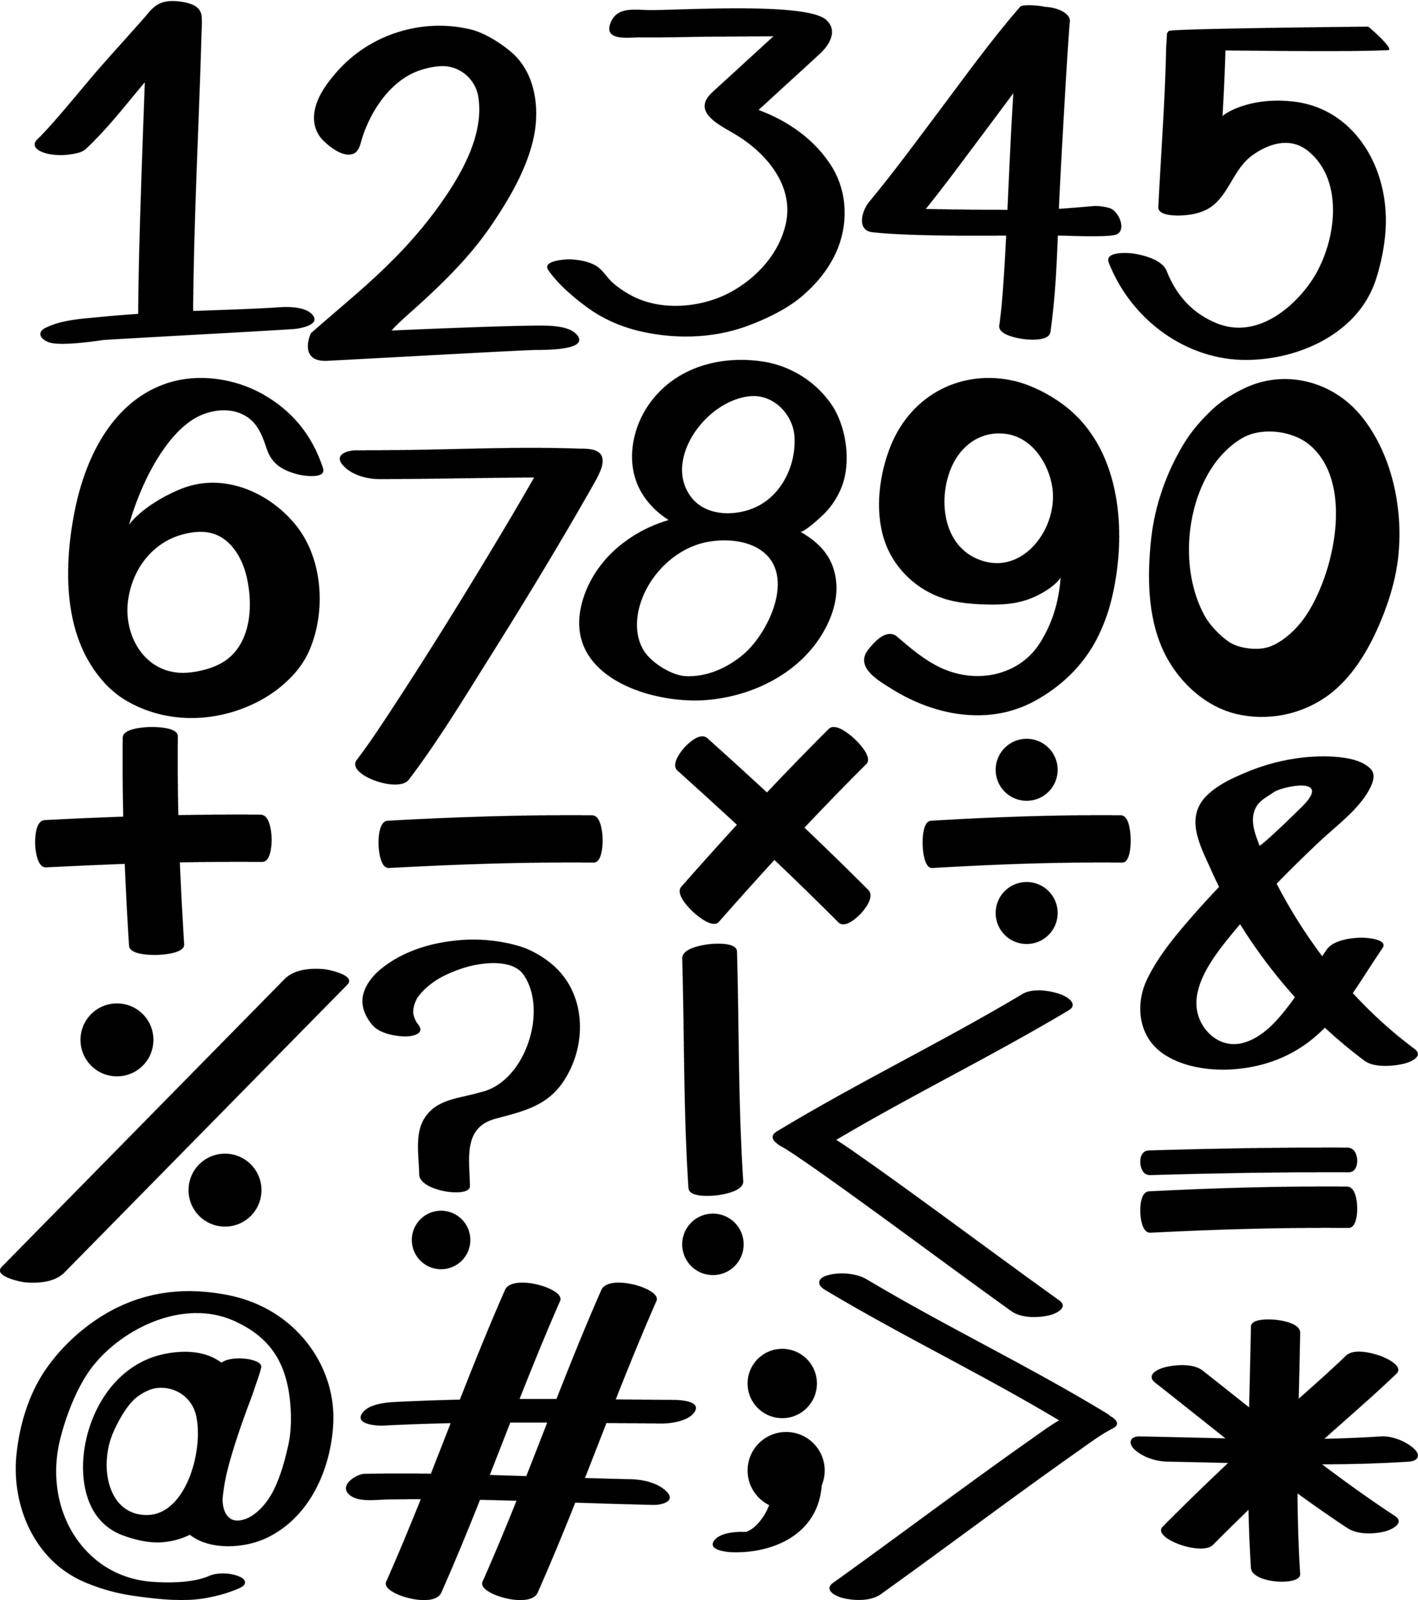 Set of numbers in black colors on a white background